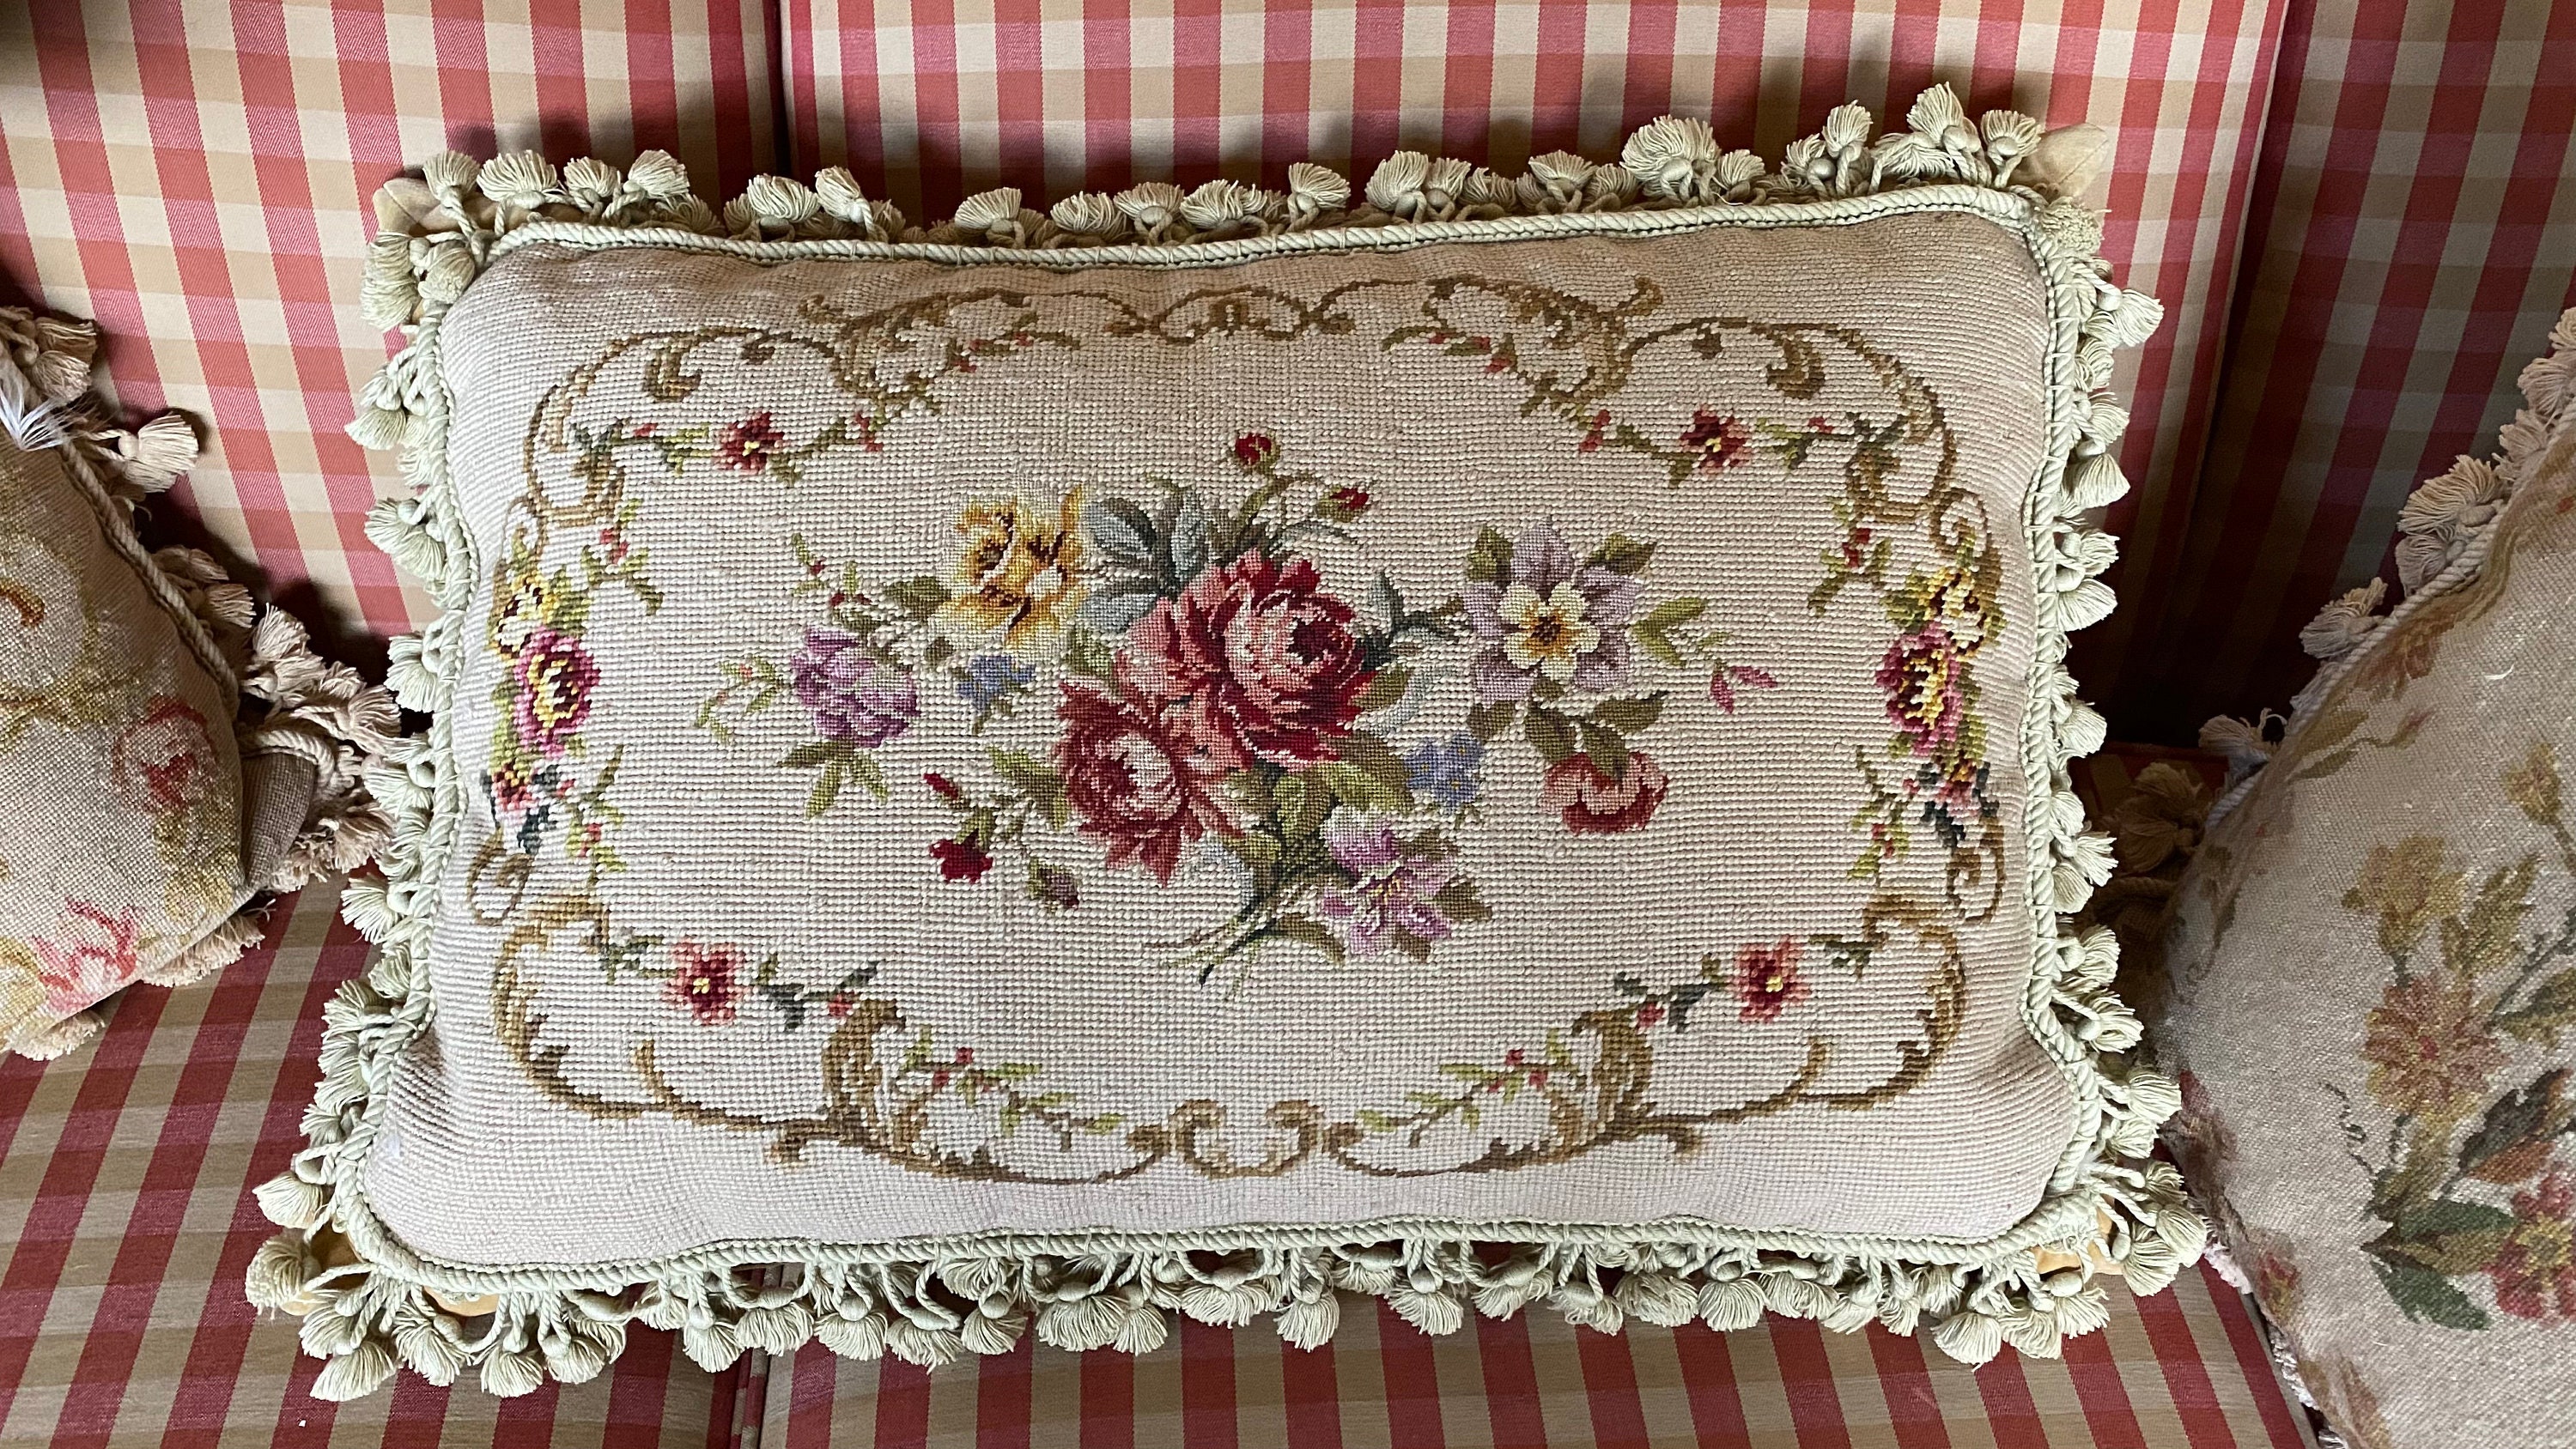 A Pair of 18th Century French Needlepoint Pillows 